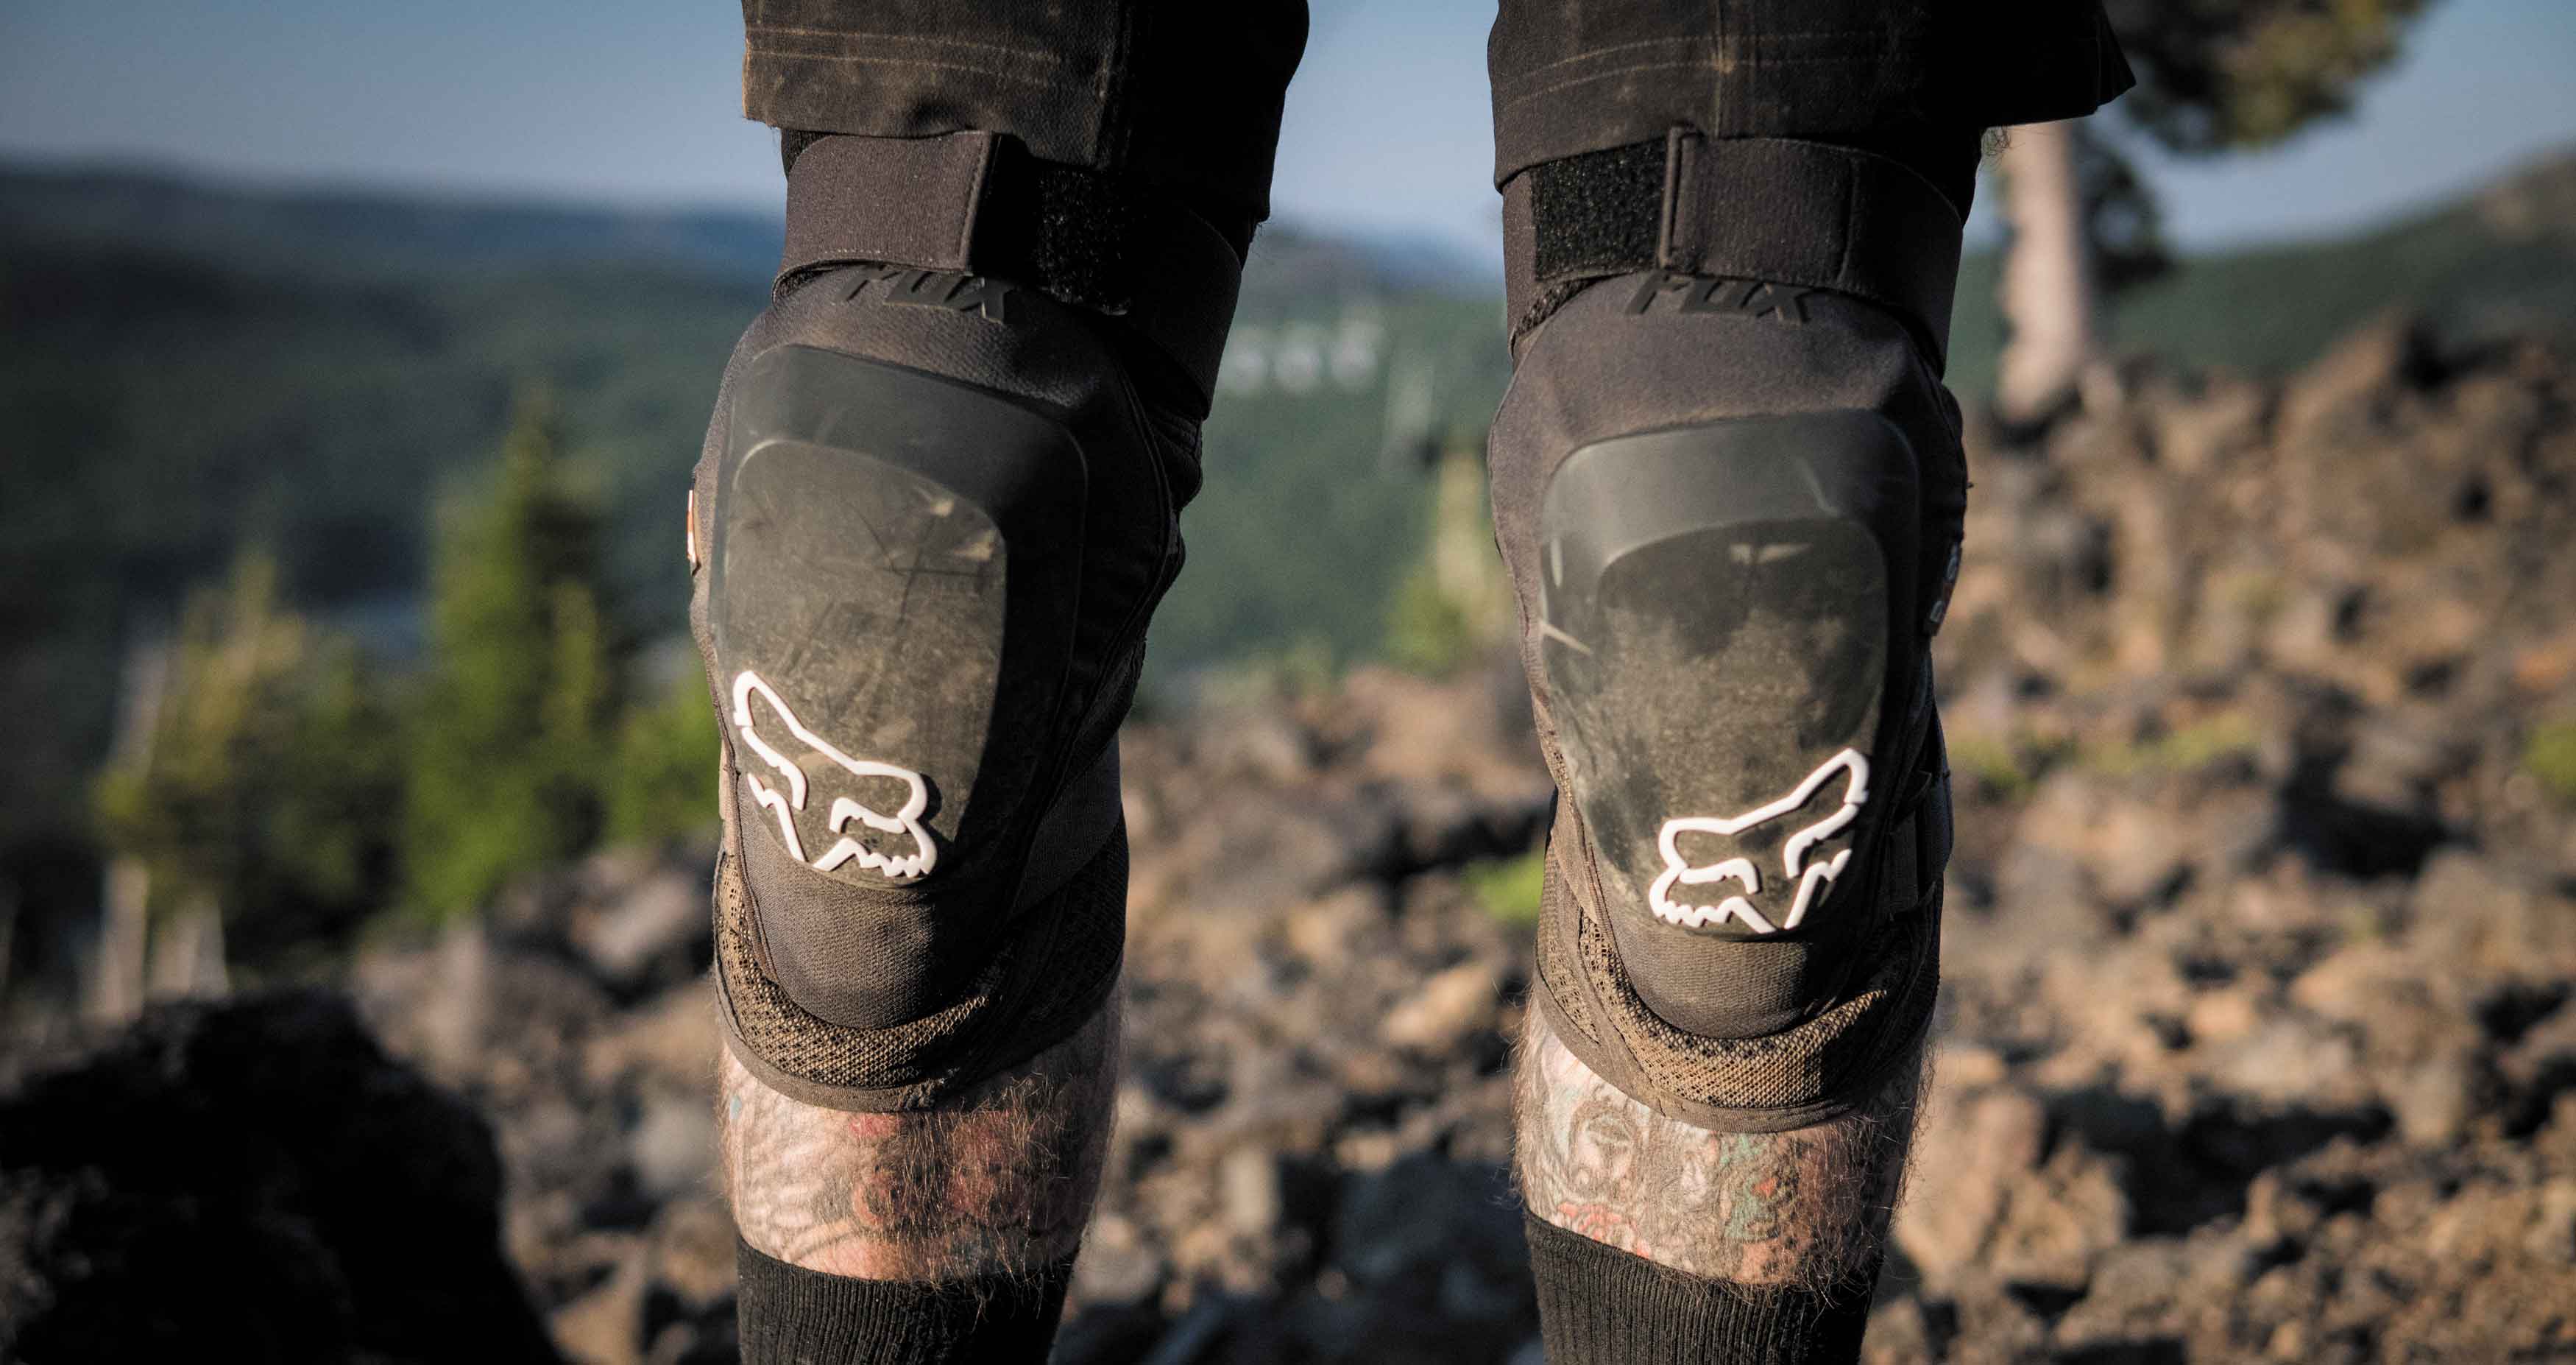 Review: Fox Launch Pro D30 Knee Pads - The Loam Wolf